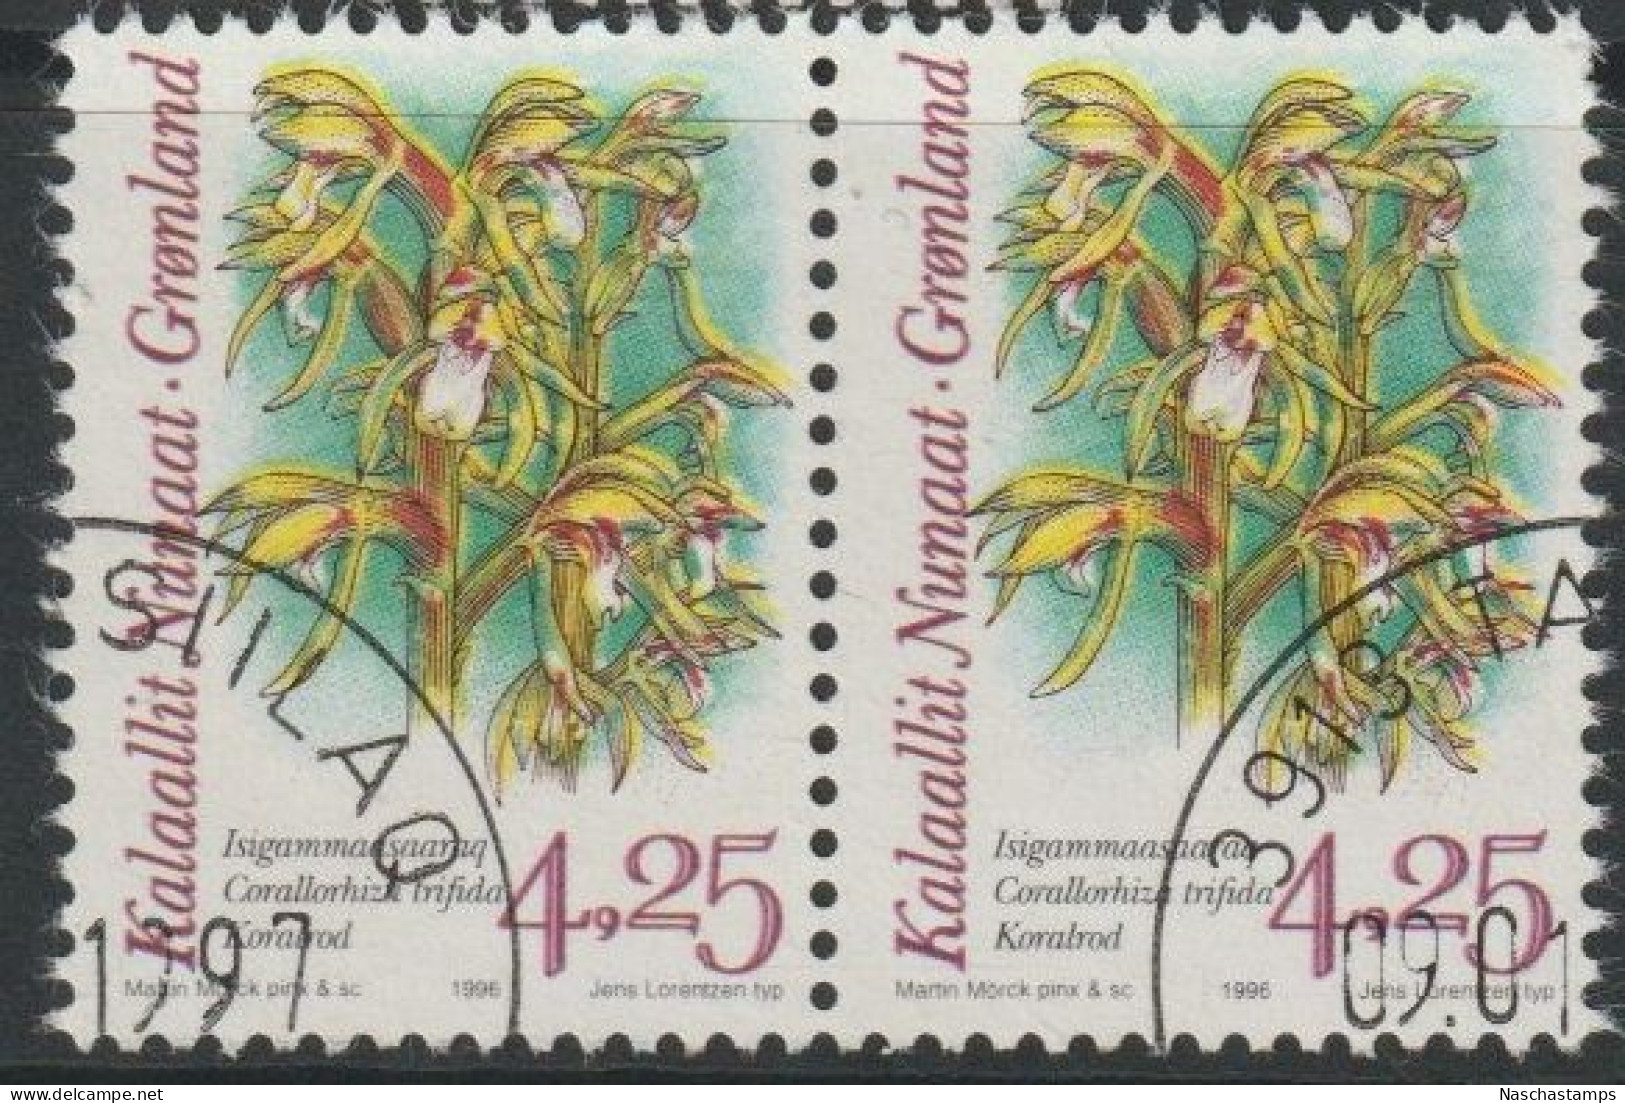 Greenland 1996 4.25 Pair Arctic Orchids MH - Used Stamps